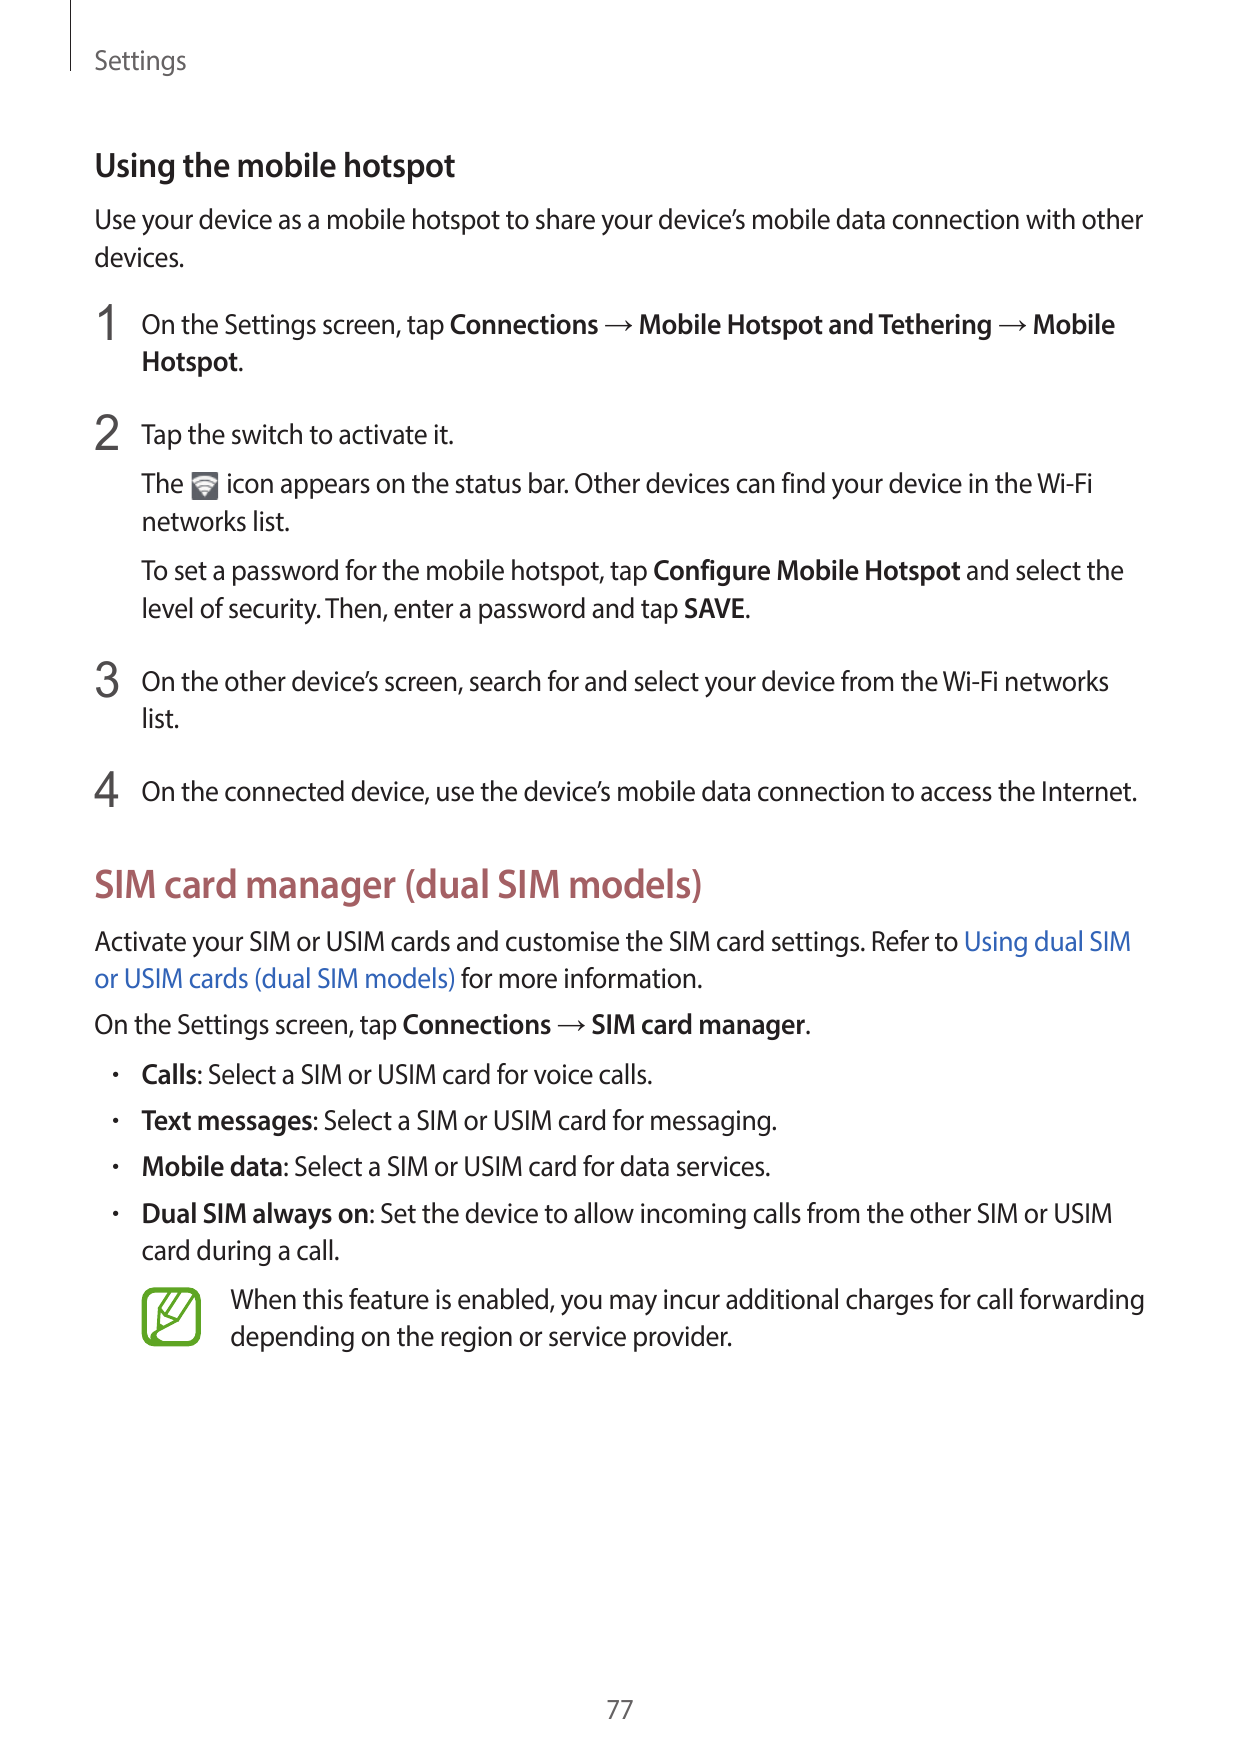 SettingsUsing the mobile hotspotUse your device as a mobile hotspot to share your device’s mobile data connection with otherdevi